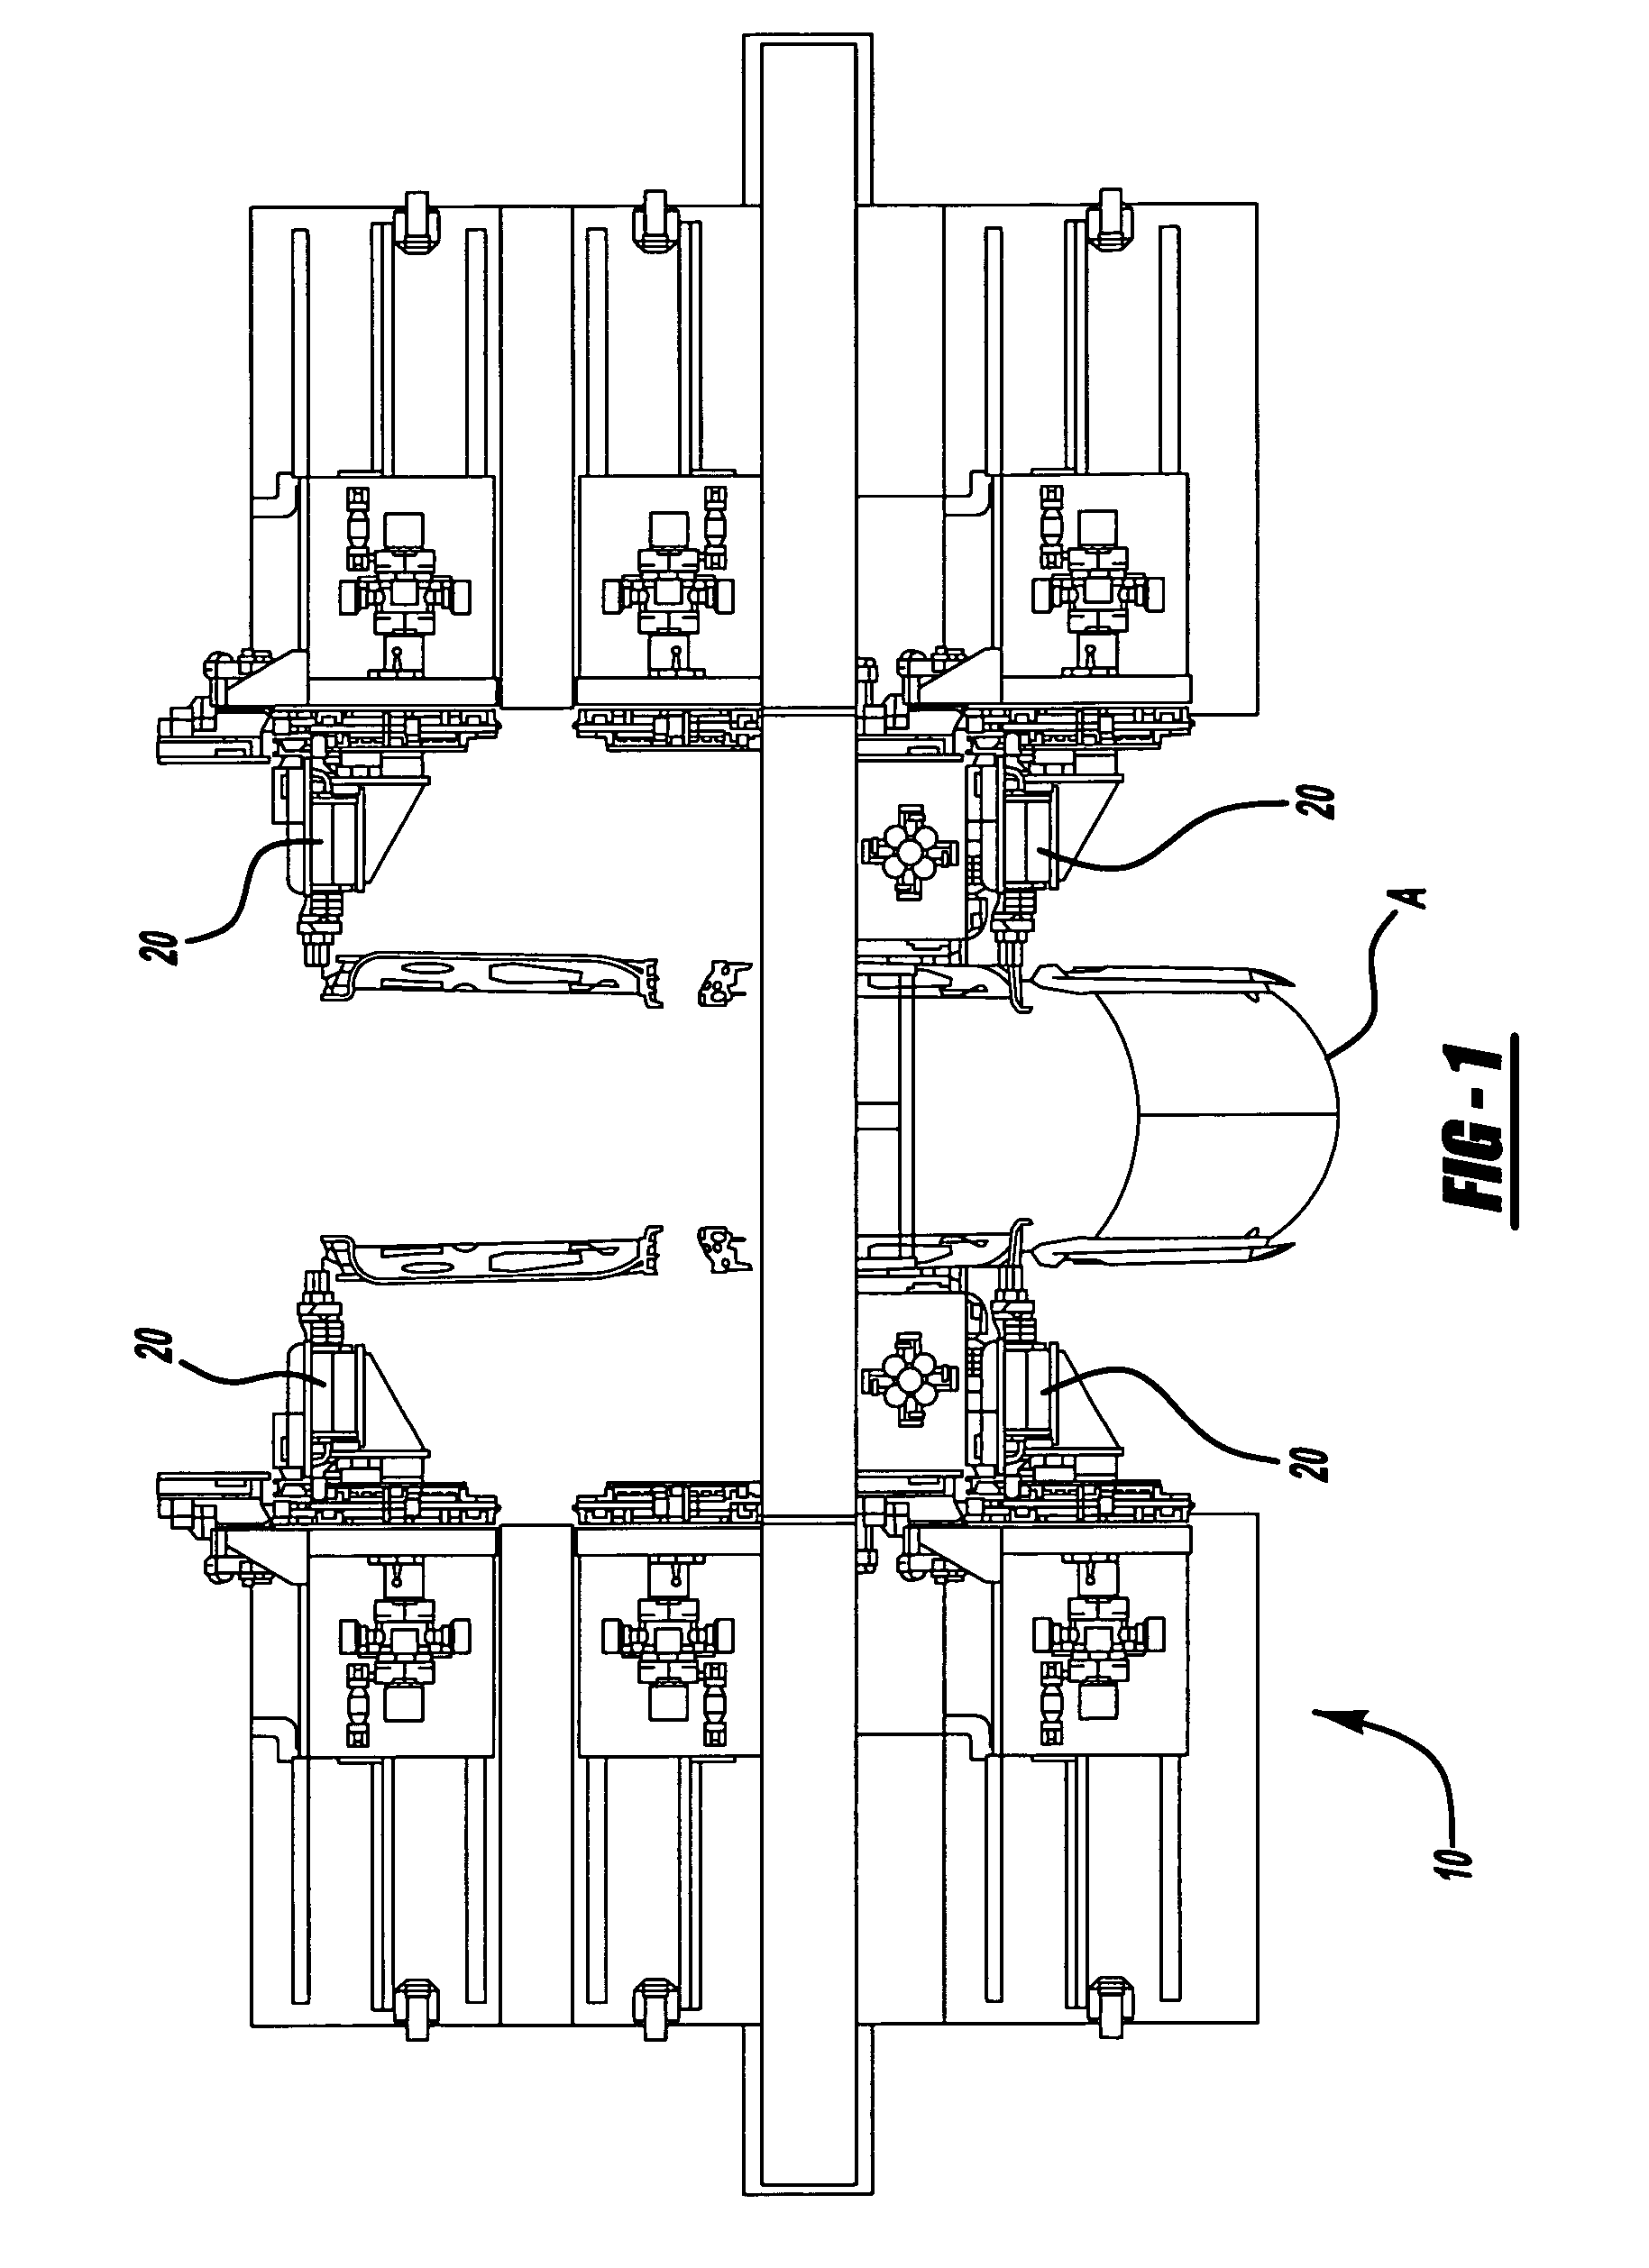 Method and apparatus for assembling exterior automotive vehicle boby components onto an automotive vehicle boby